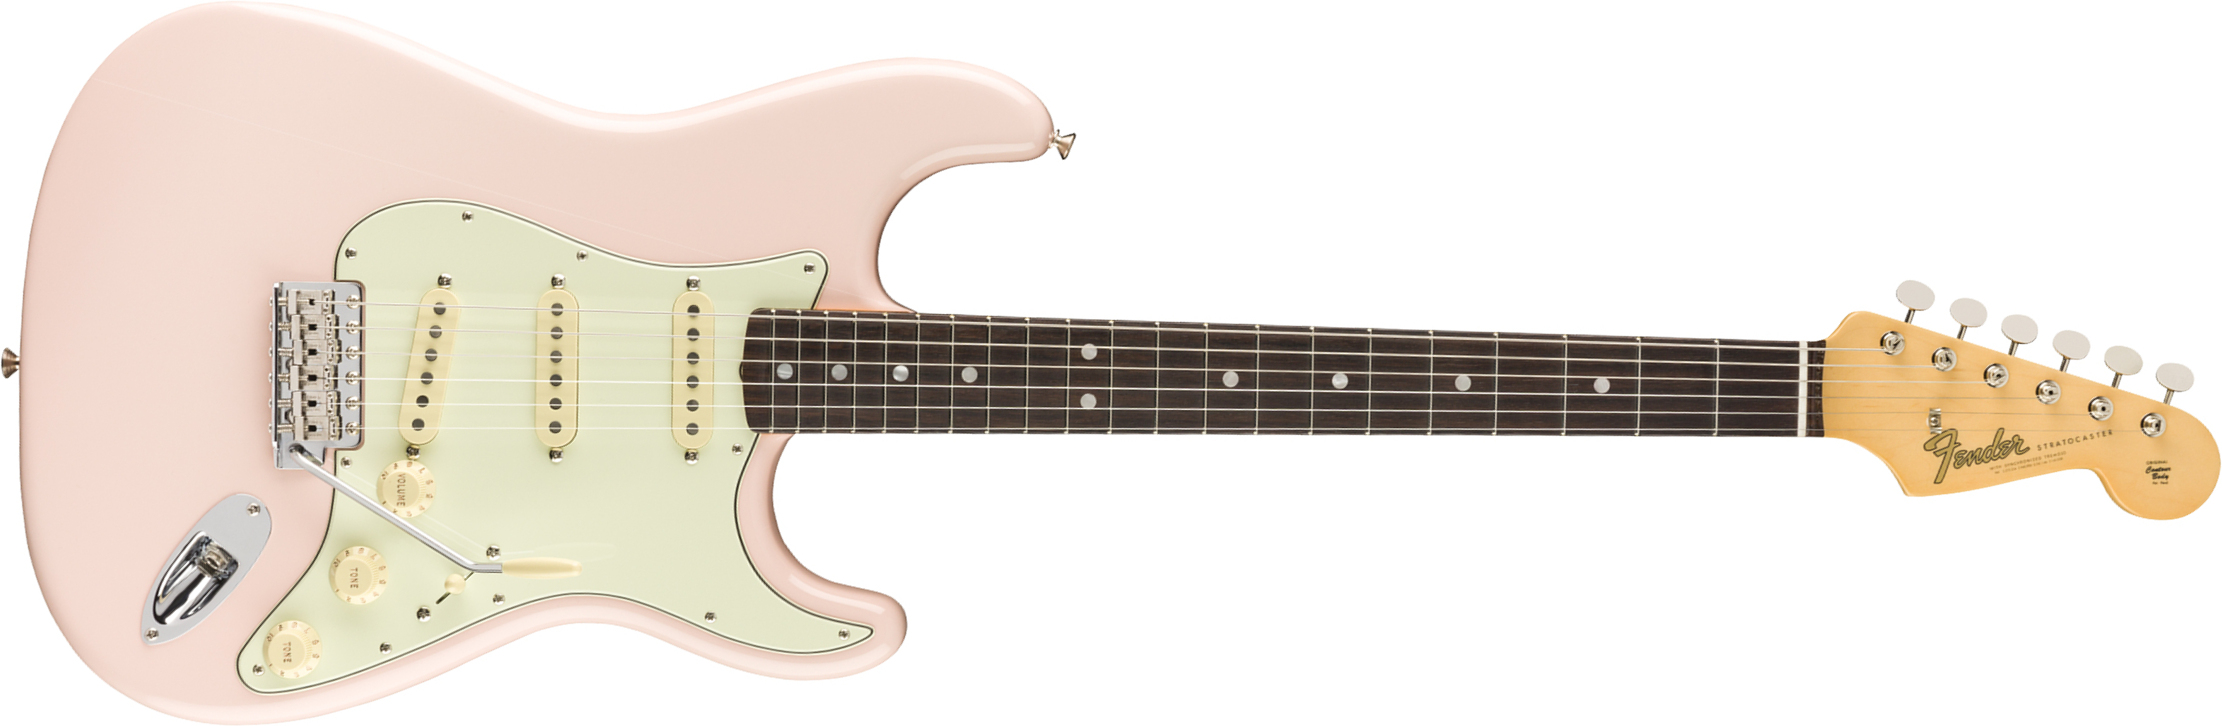 Fender Strat '60s American Original Usa Sss Rw - Shell Pink - Str shape electric guitar - Main picture